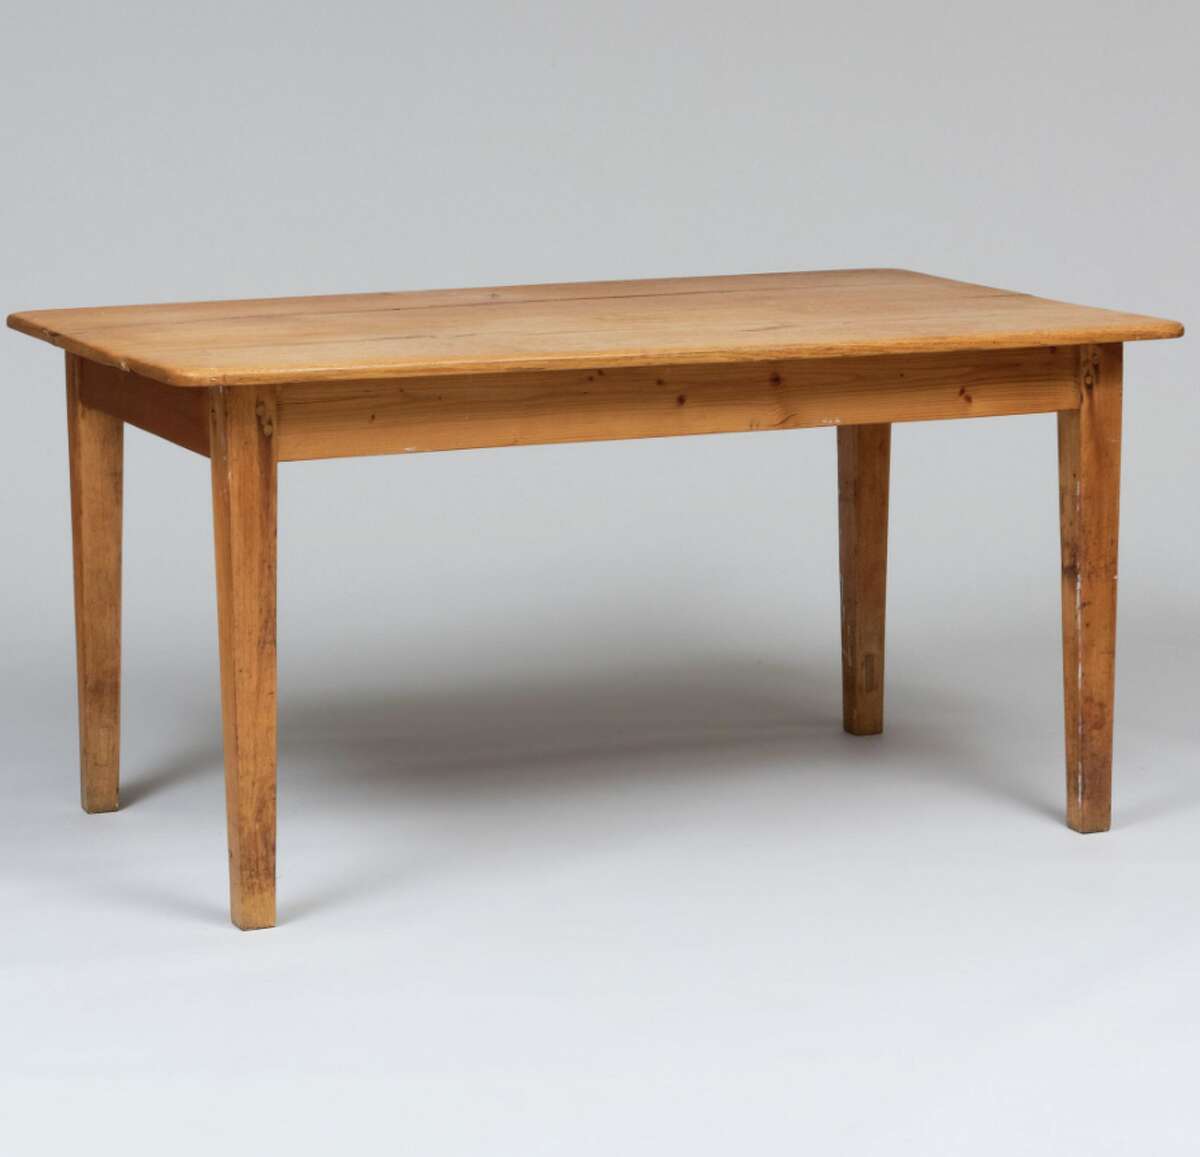 The American oak table Didion used as a desk in her office.